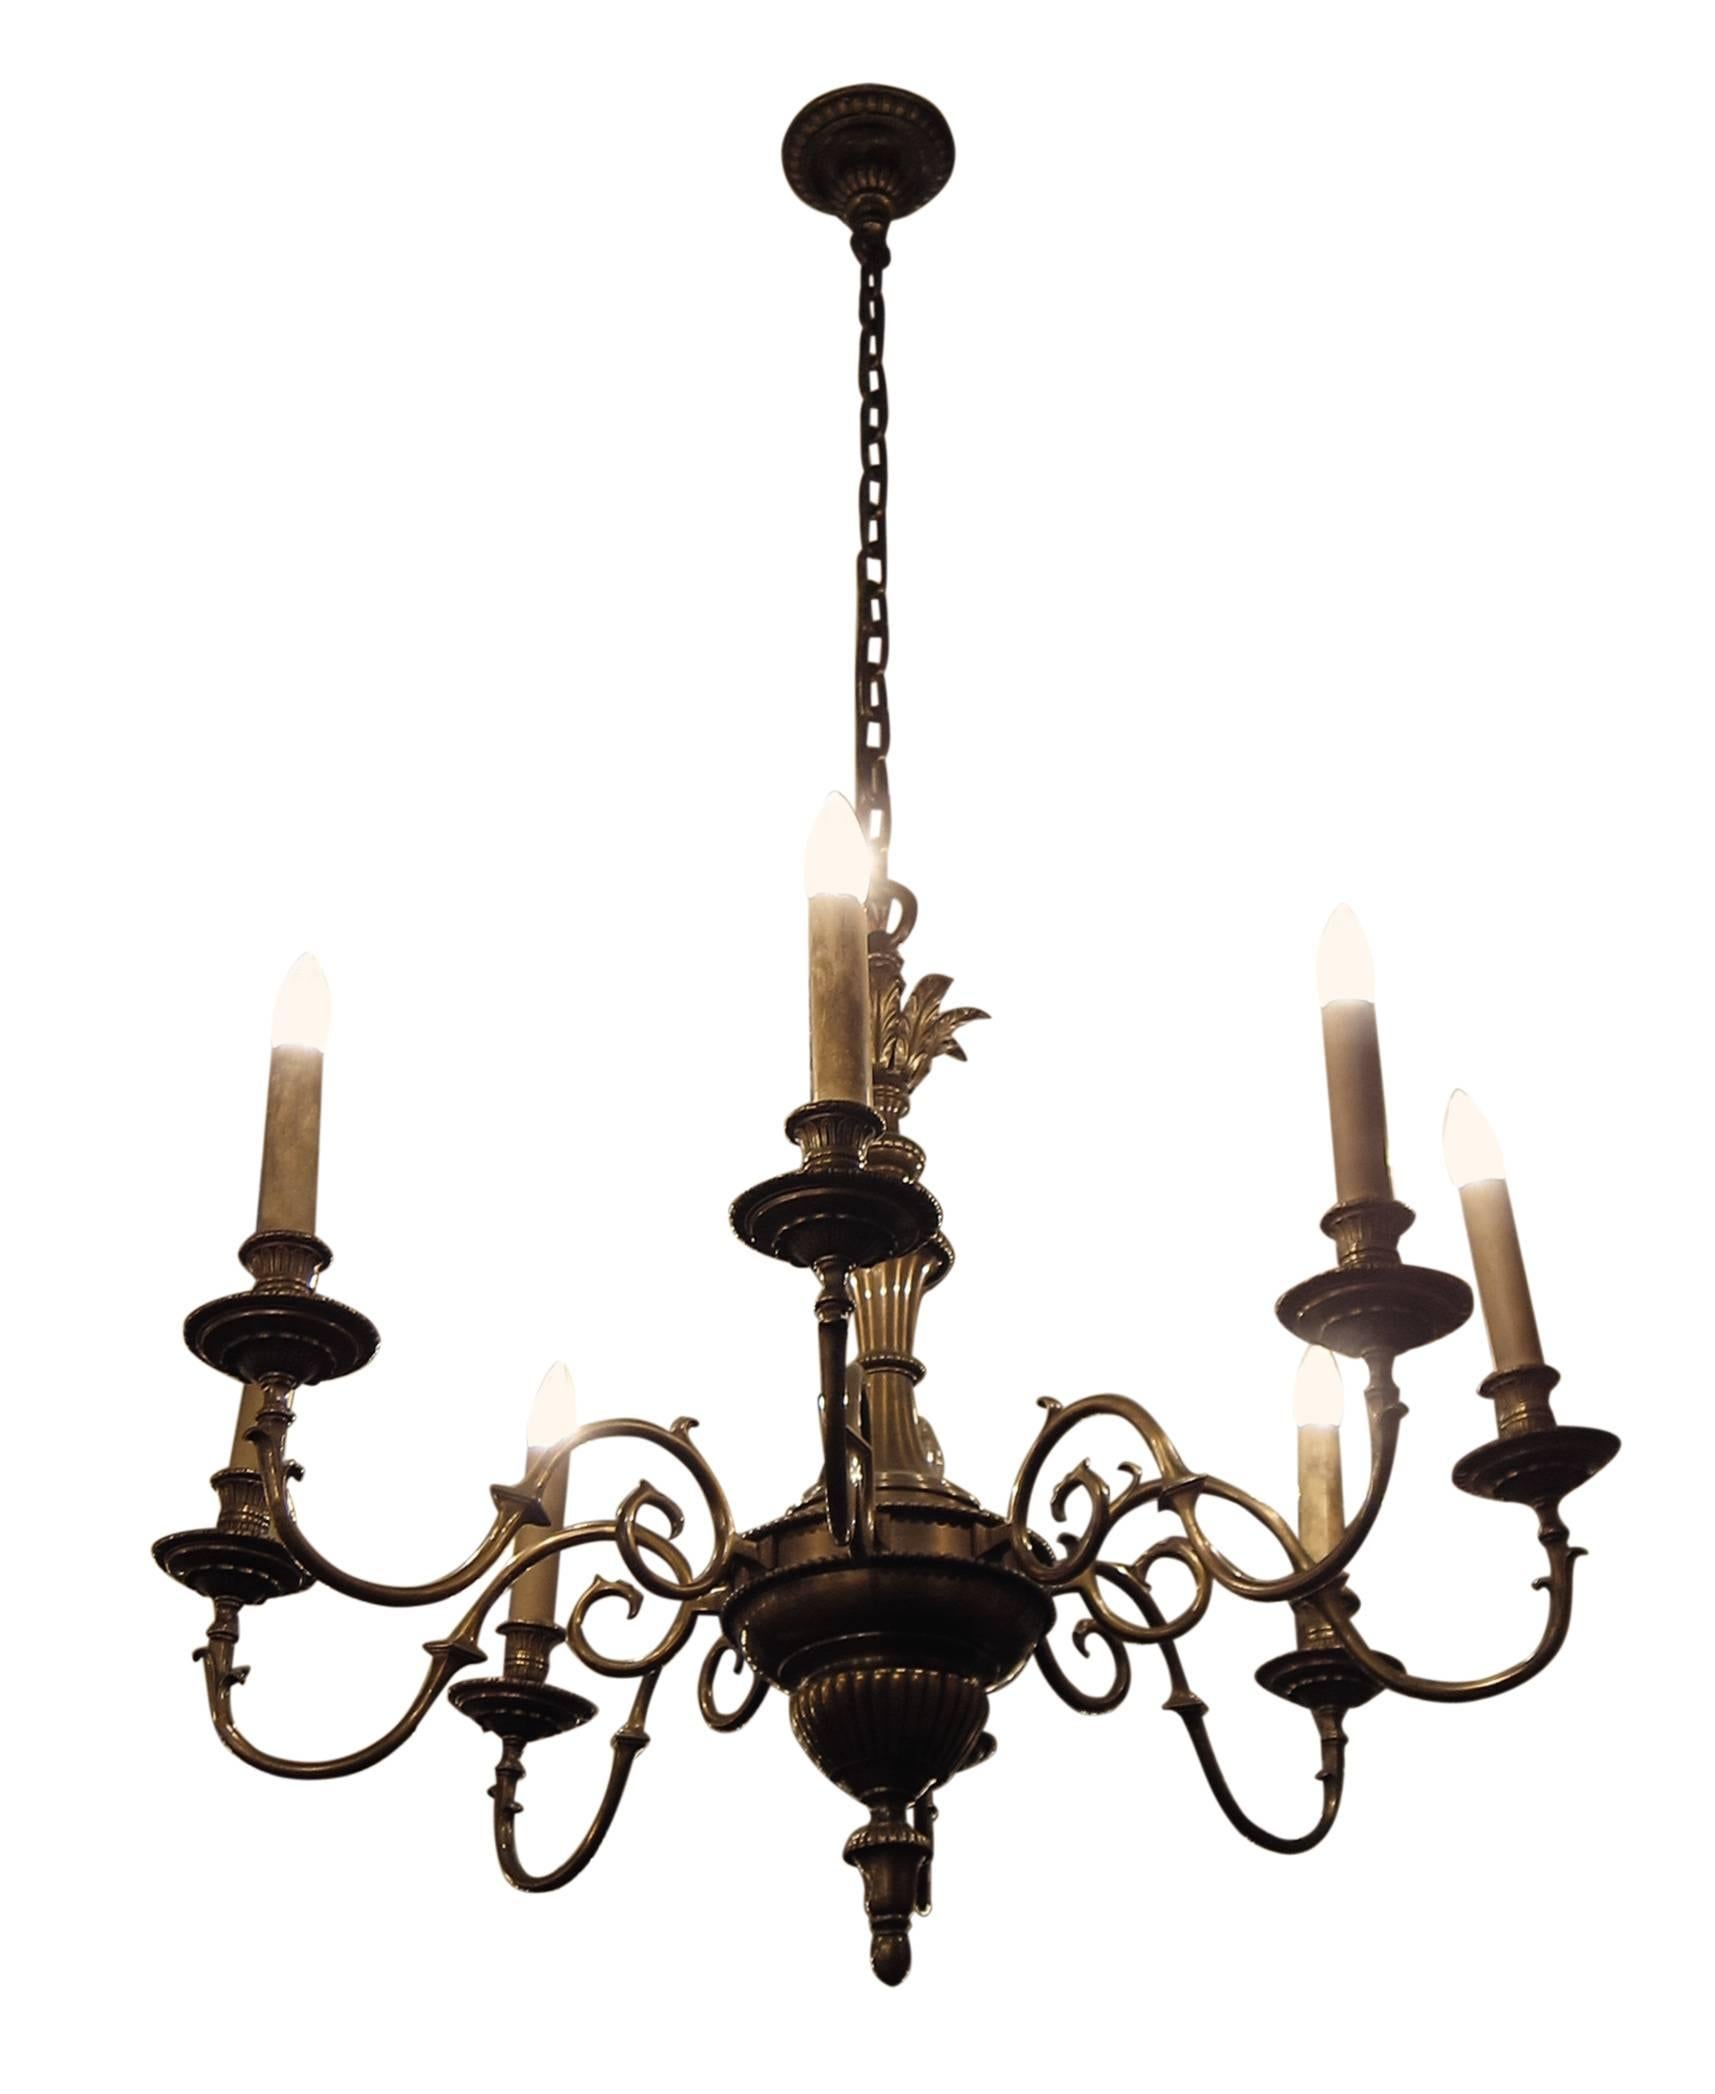 Antique eight arm French style chandelier with a wonderful patina. Made of bronze with an antique finish. Price includes restoration. 1-2 weeks to process. Please specify the overall drop that is needed upon purchasing. This can be seen at our 2420